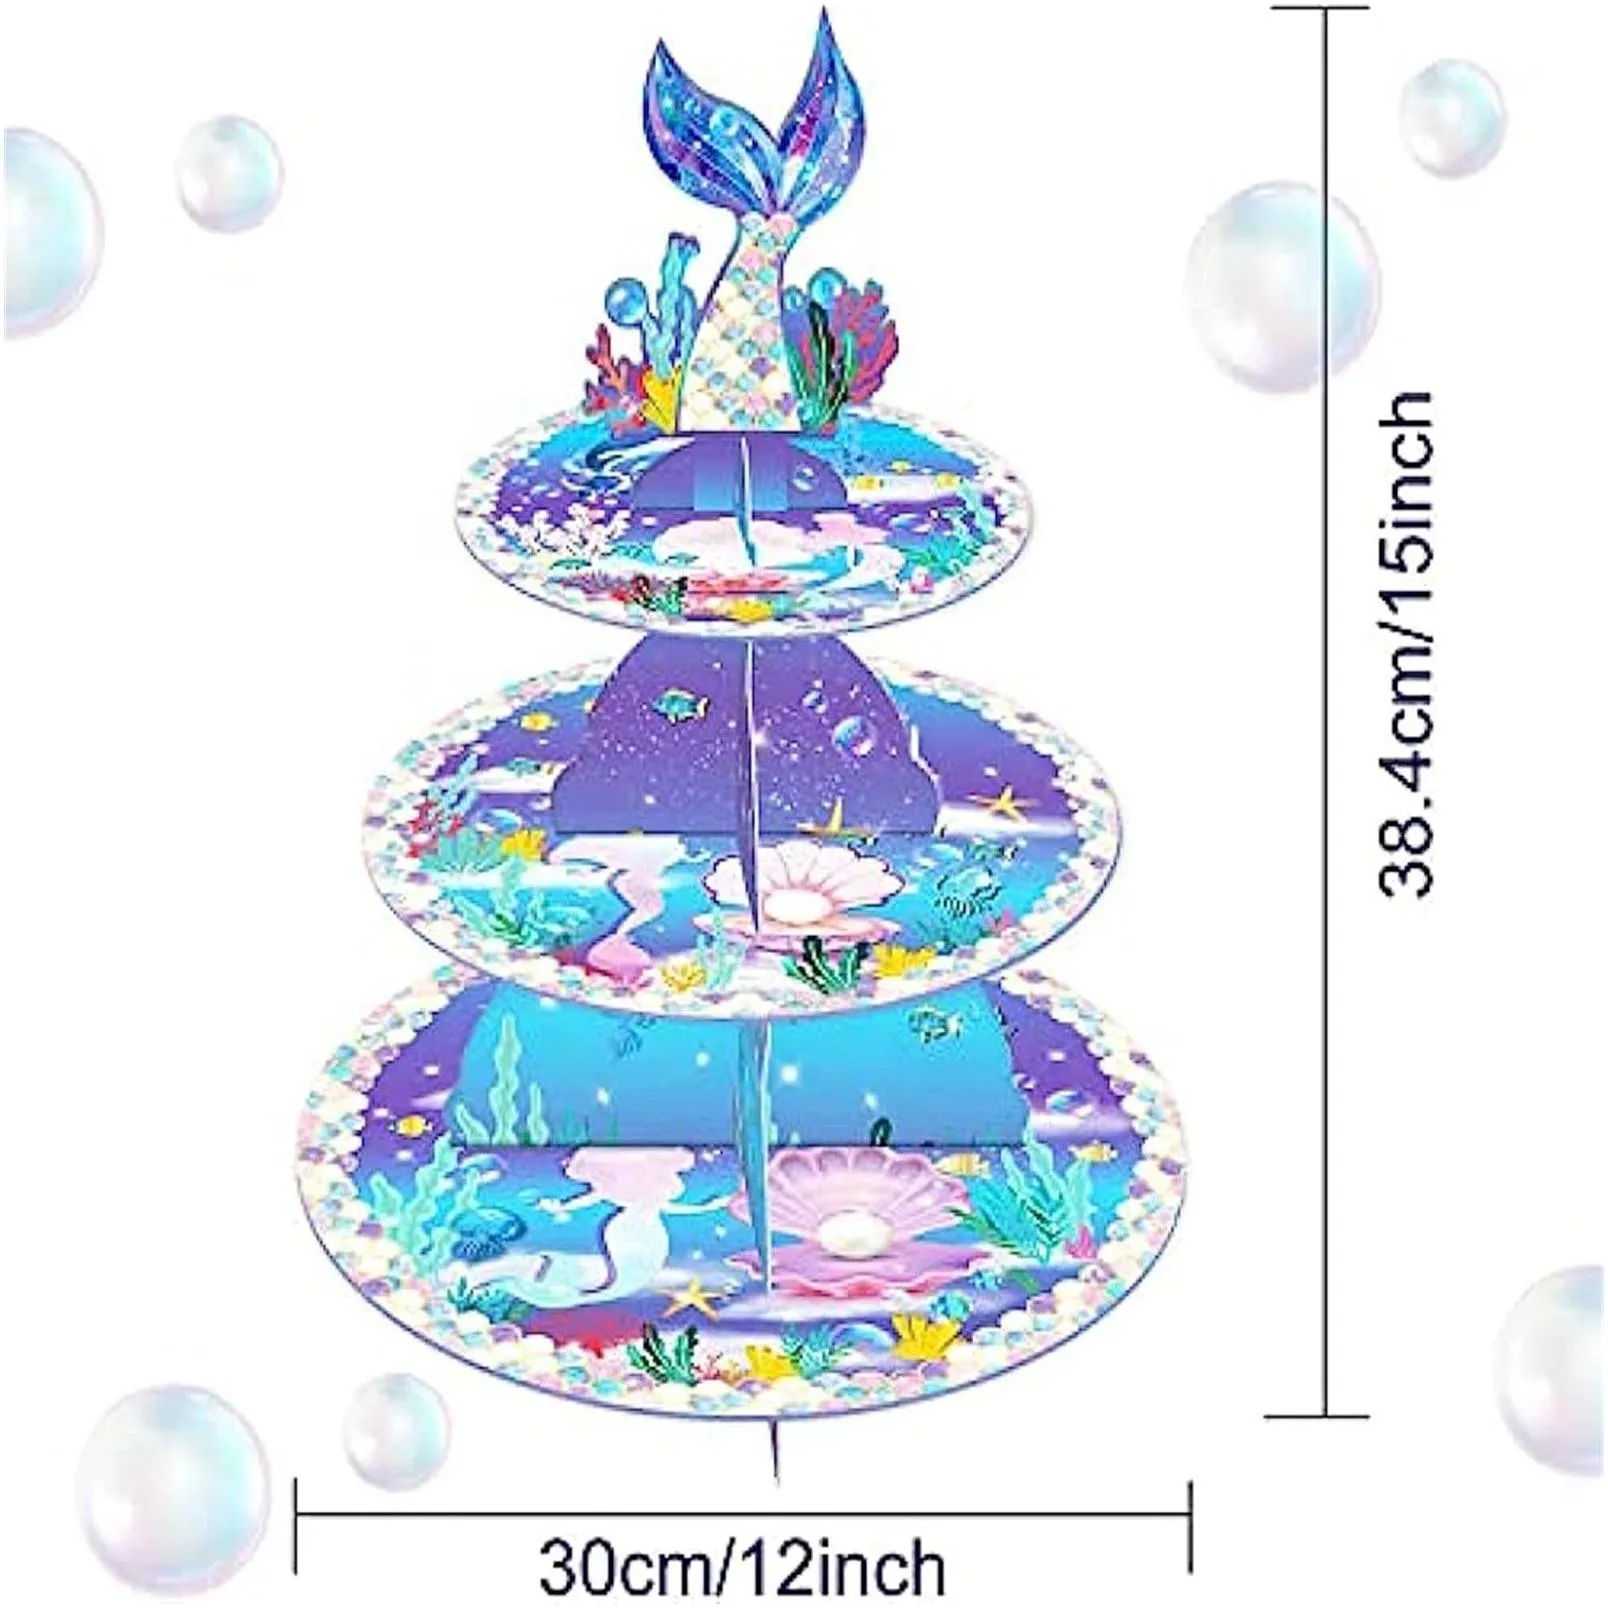 mermaid cake stand 3-tier cardboard cupcake holder tower round desserts pastry serving tray party supplies for 12-18 cupcakes perfect baby shower birthday